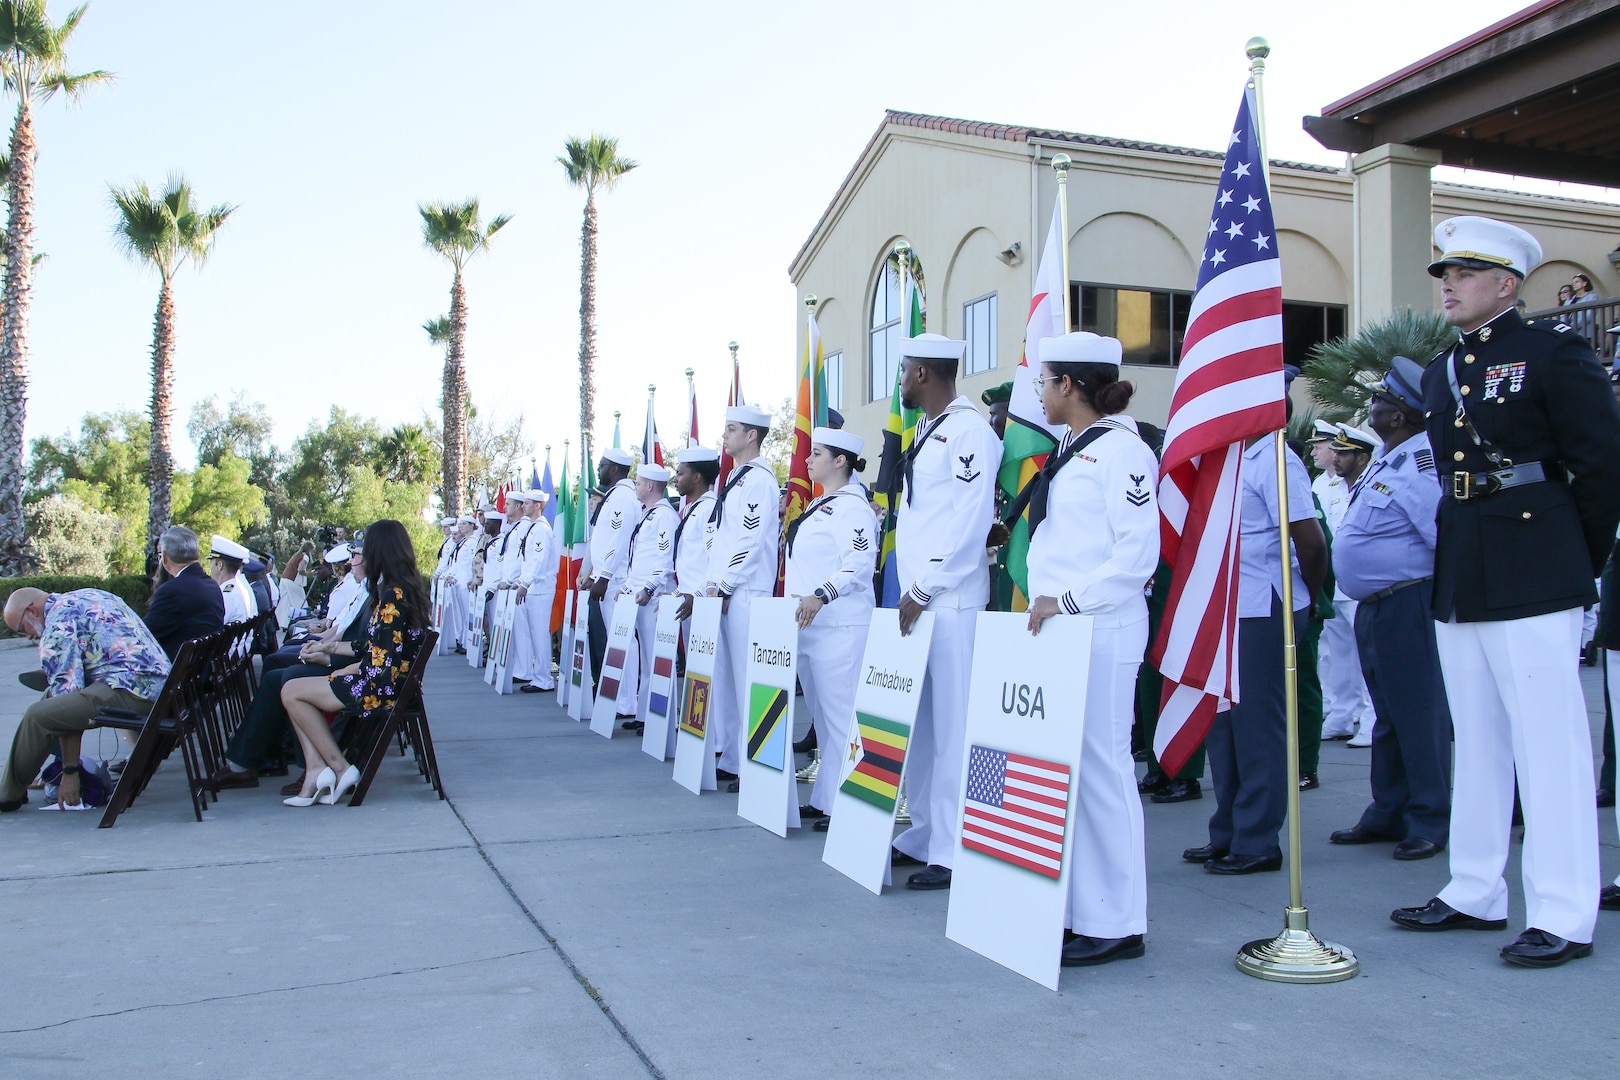 Opening Ceremony of the 14th Edition of the Conseil International du Sport Militaire (CISM) World Military Golf Championship held at the Admiral Baker Golf Course in San Diego, Calif., hosted by Naval Base San Diego, Calif.  Nations from Bahrain, Canada, Denmark, Dominican Republic, Estonia, France, Germany, Ireland, Italy, Kazakhstan, Kenya, Latvia, Netherlands, Sri Lanka, Tanzania, Zimbabwe, and host USA compete for gold. Department of Defense Courtesy Photo by Mr. Richard Valentine - Released.